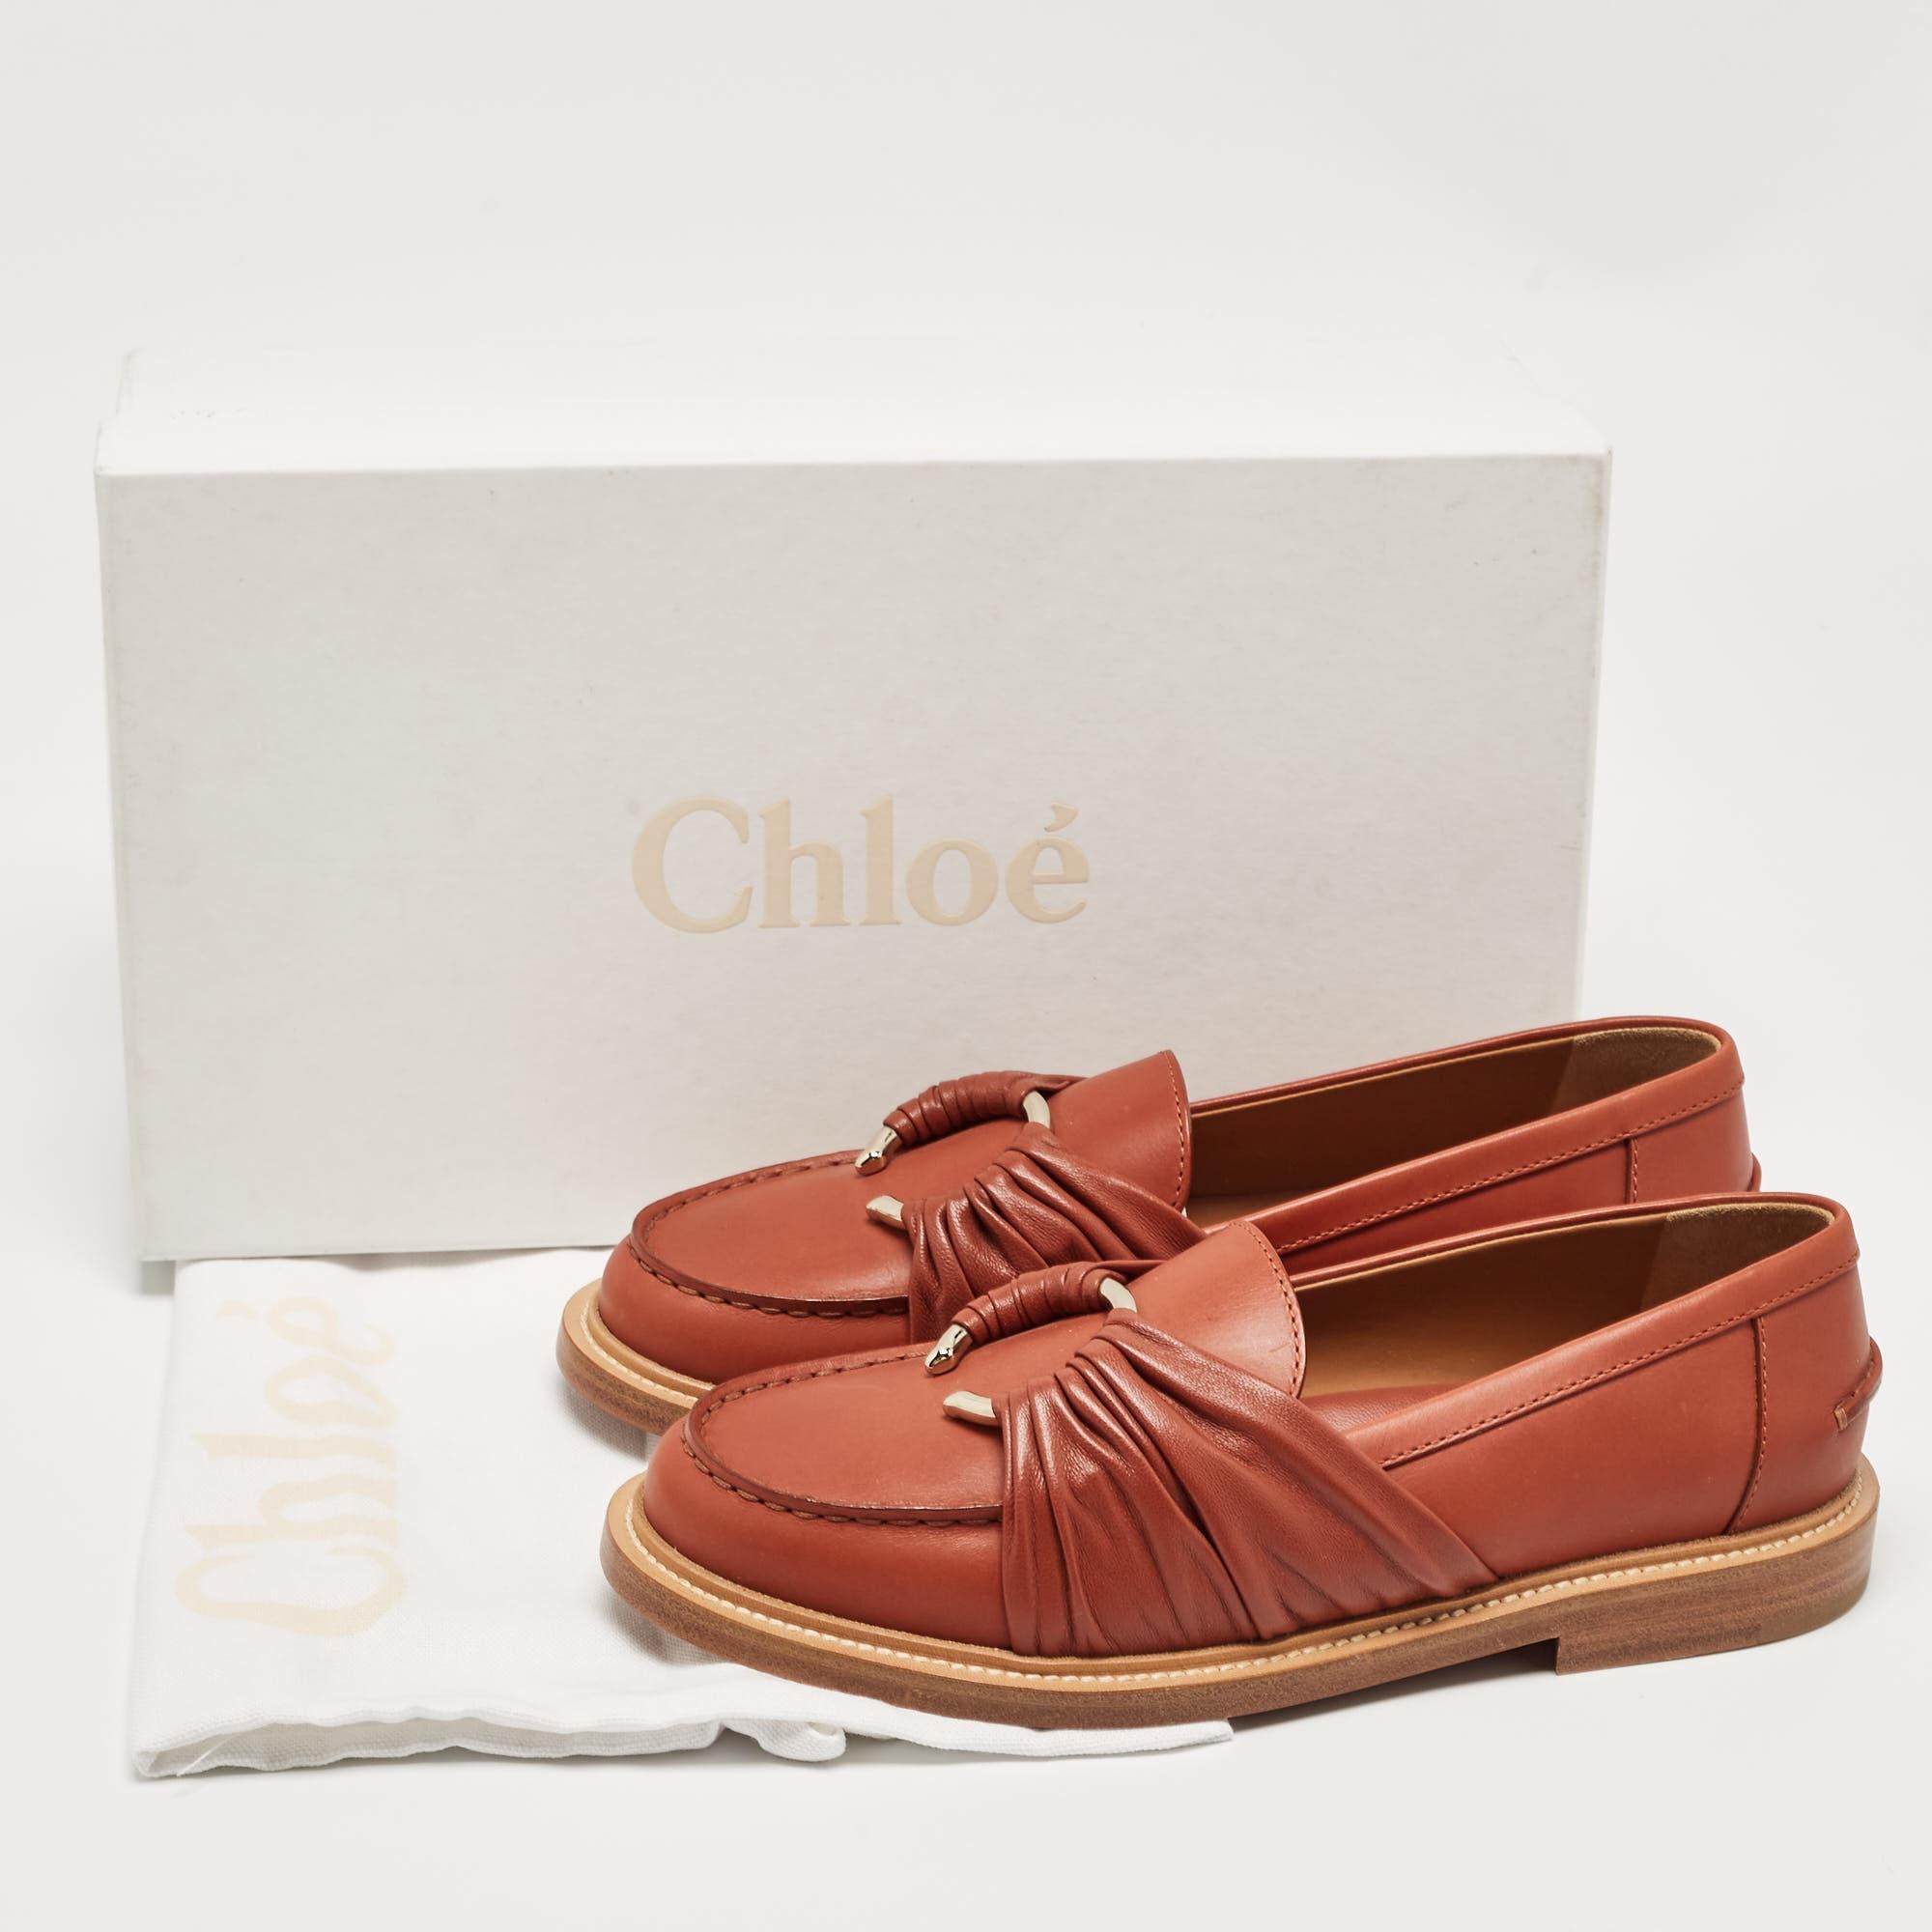 Chloe Brown Leather C Logo Loafers Size 37 For Sale 5